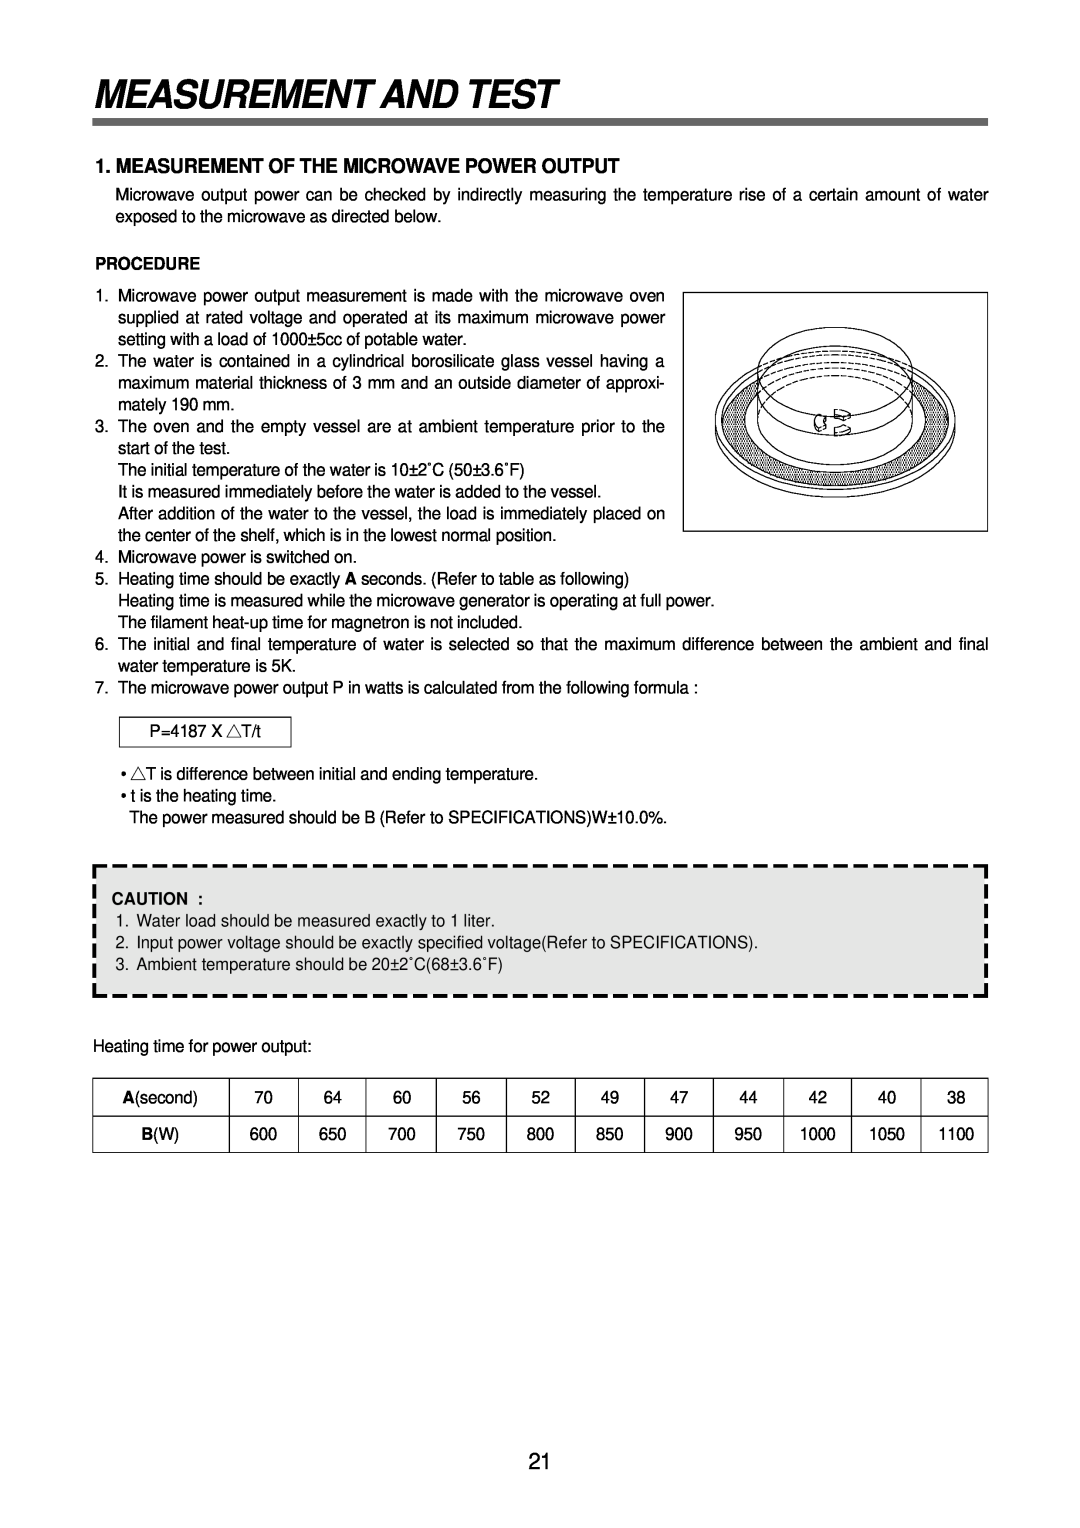 Daewoo KOR-6Q2B5S service manual Measurement And Test, Measurement Of The Microwave Power Output, Procedure 